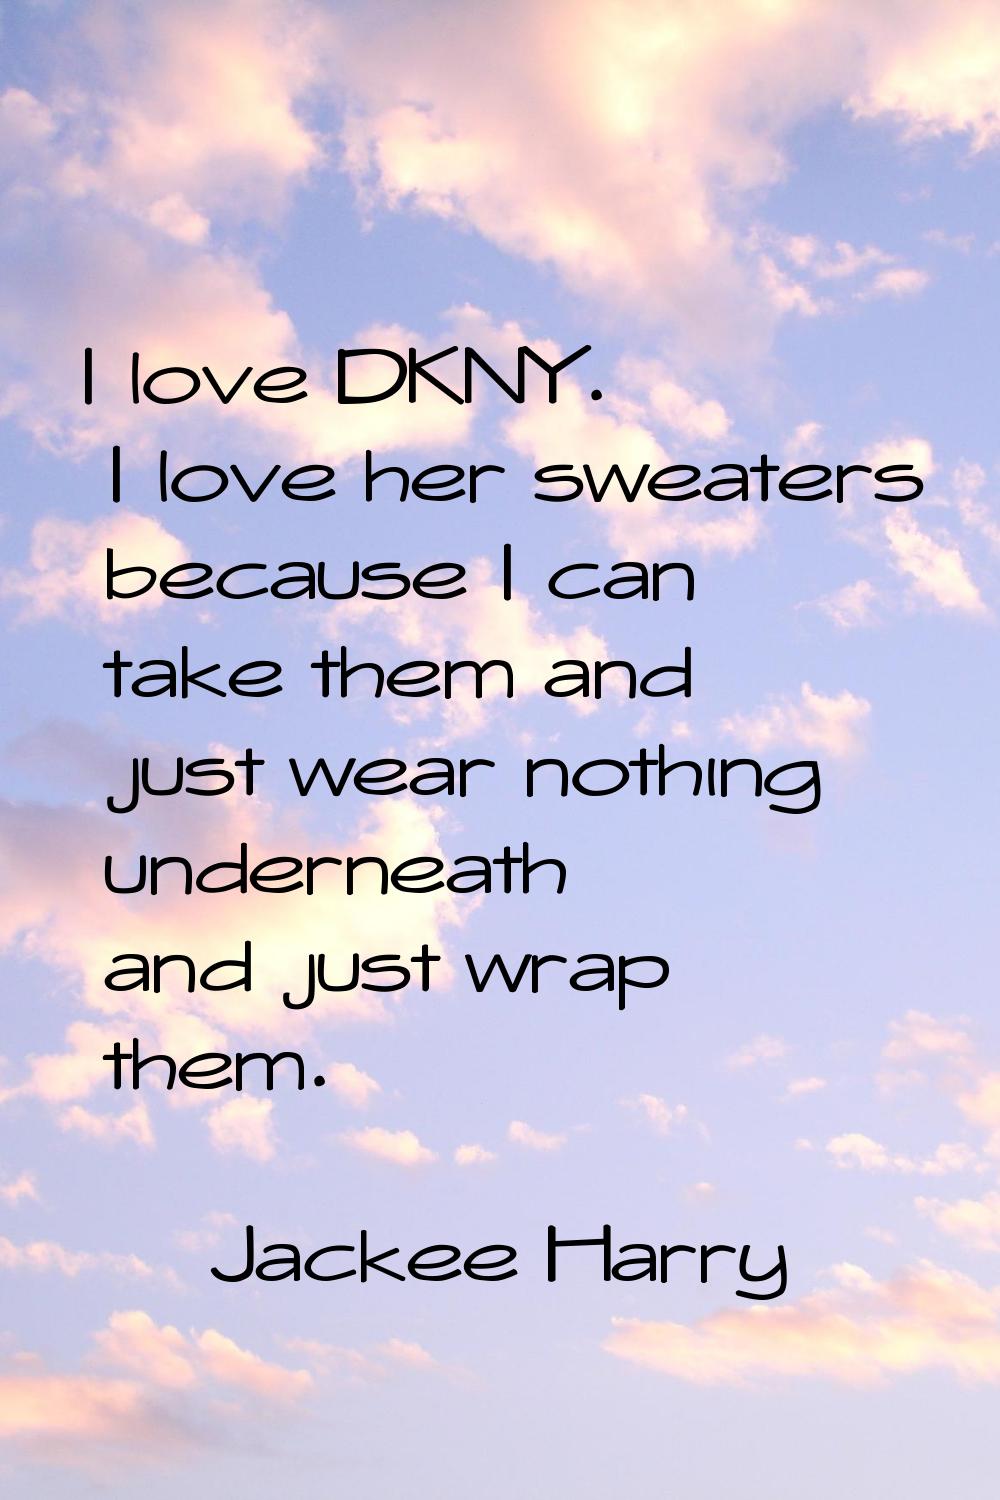 I love DKNY. I love her sweaters because I can take them and just wear nothing underneath and just 